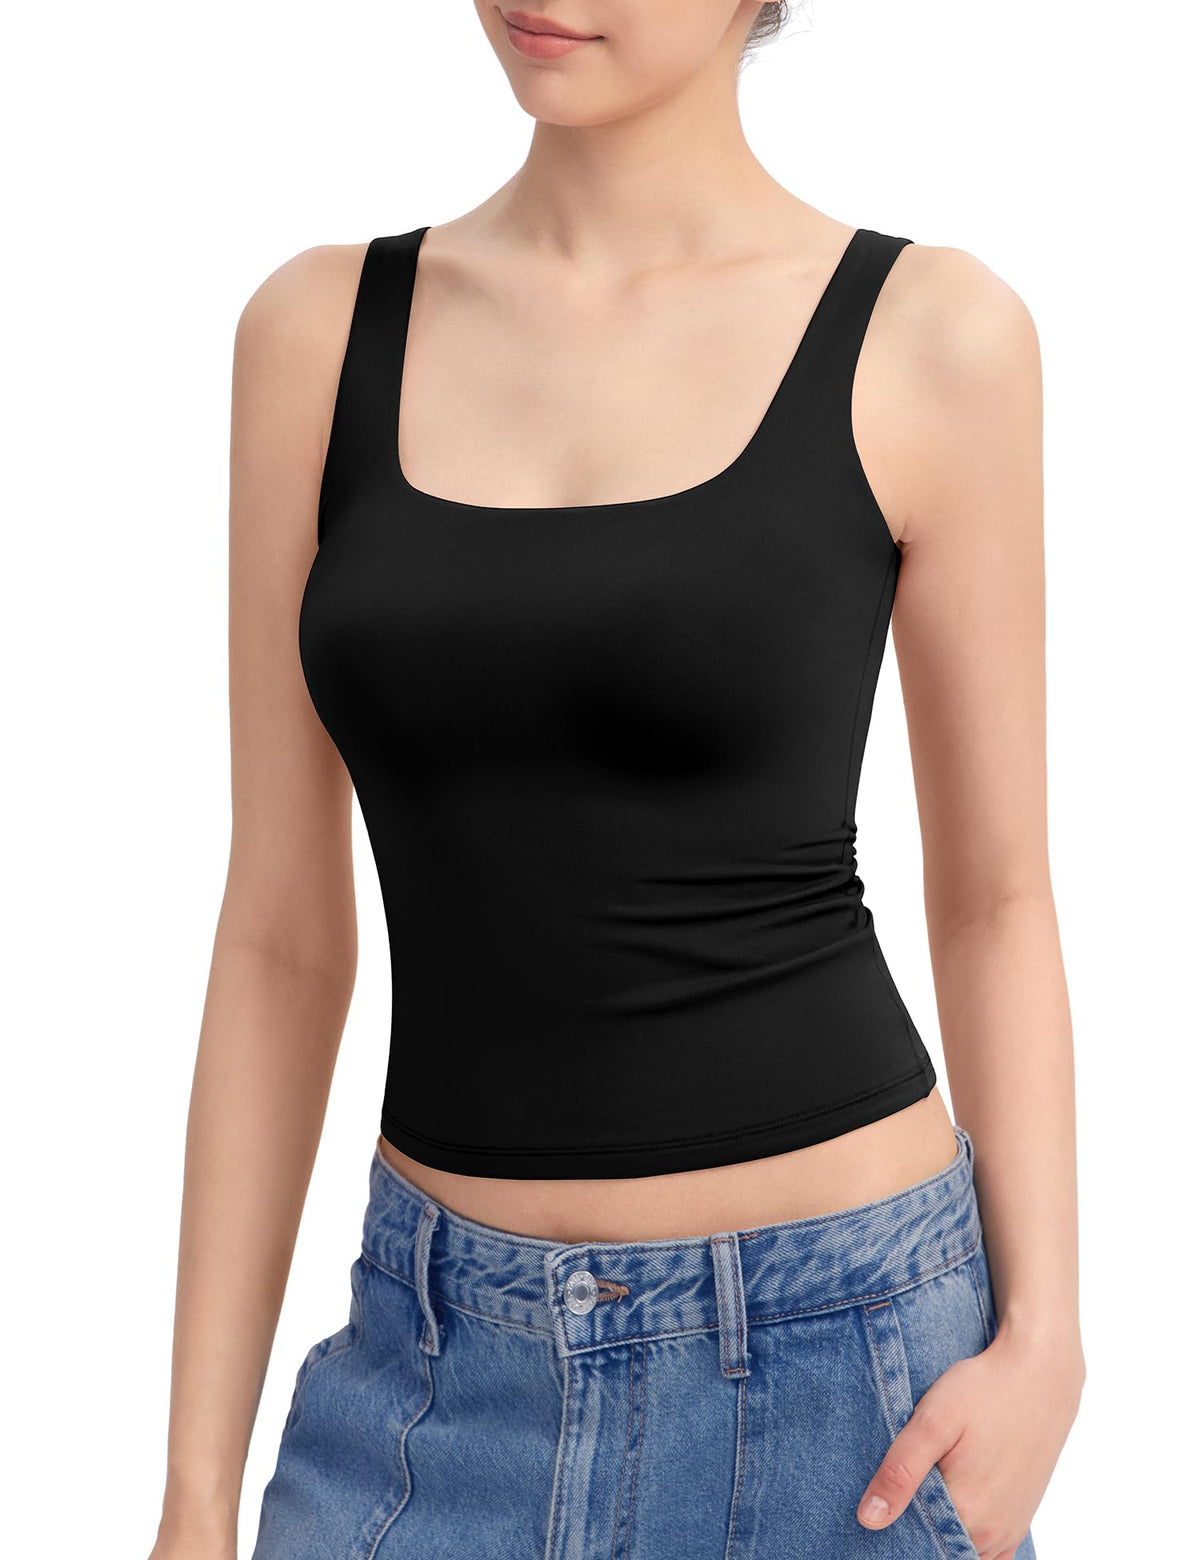 PUMIEY Tank Top for Women Sleeveless Double Lined Basic Summer Tops, Jet Black Medium